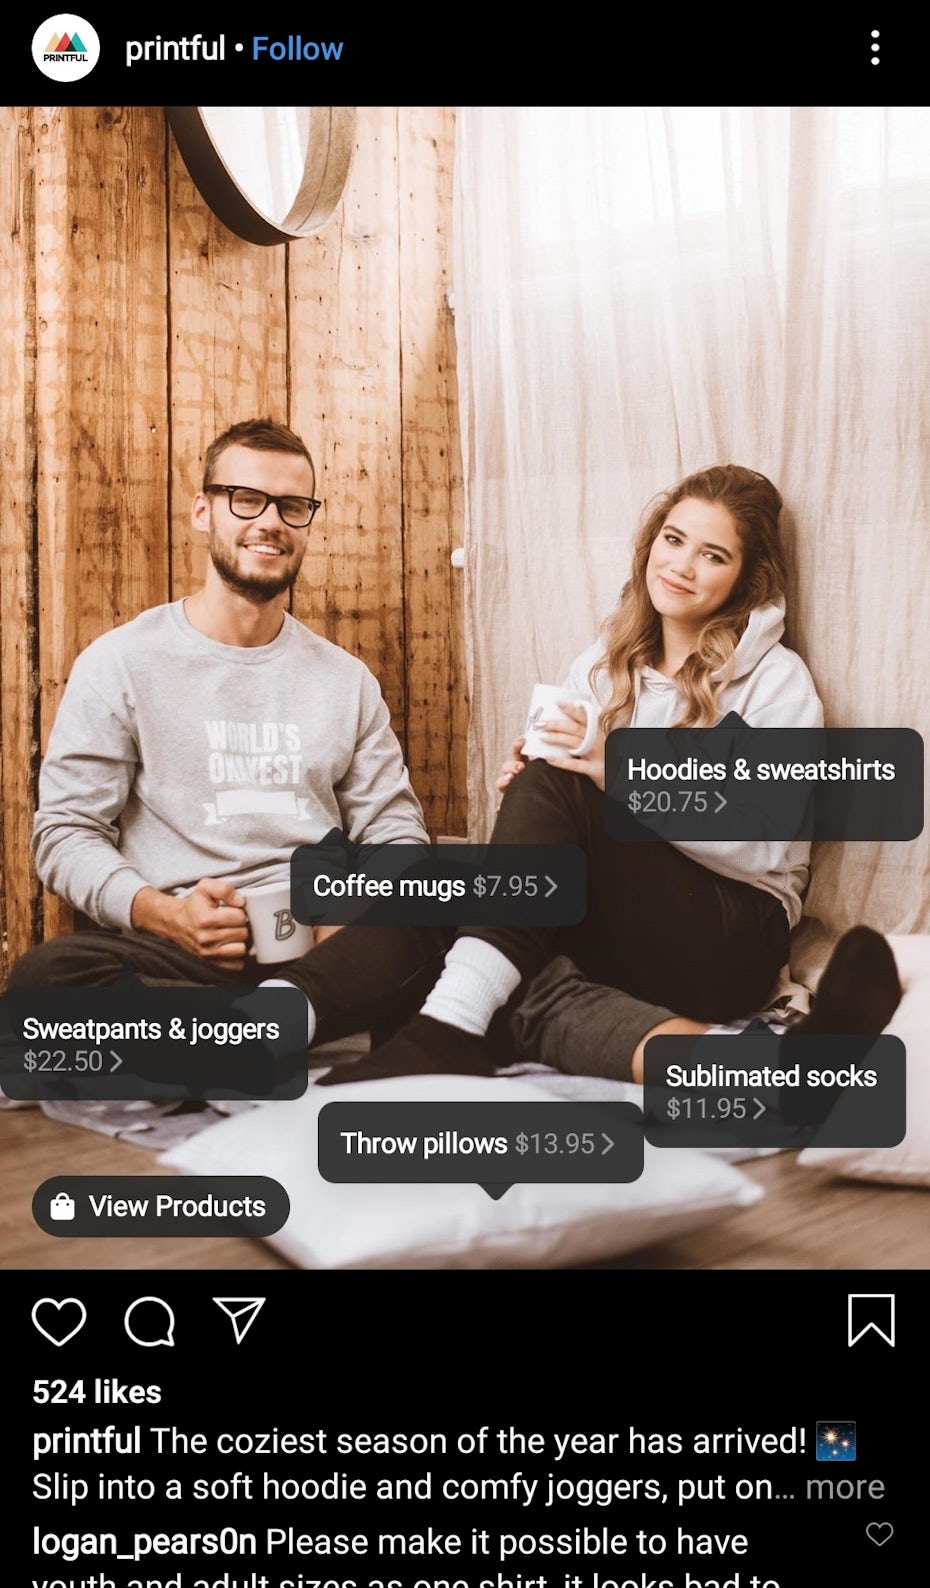 Example of an Instagram post with products to buy.